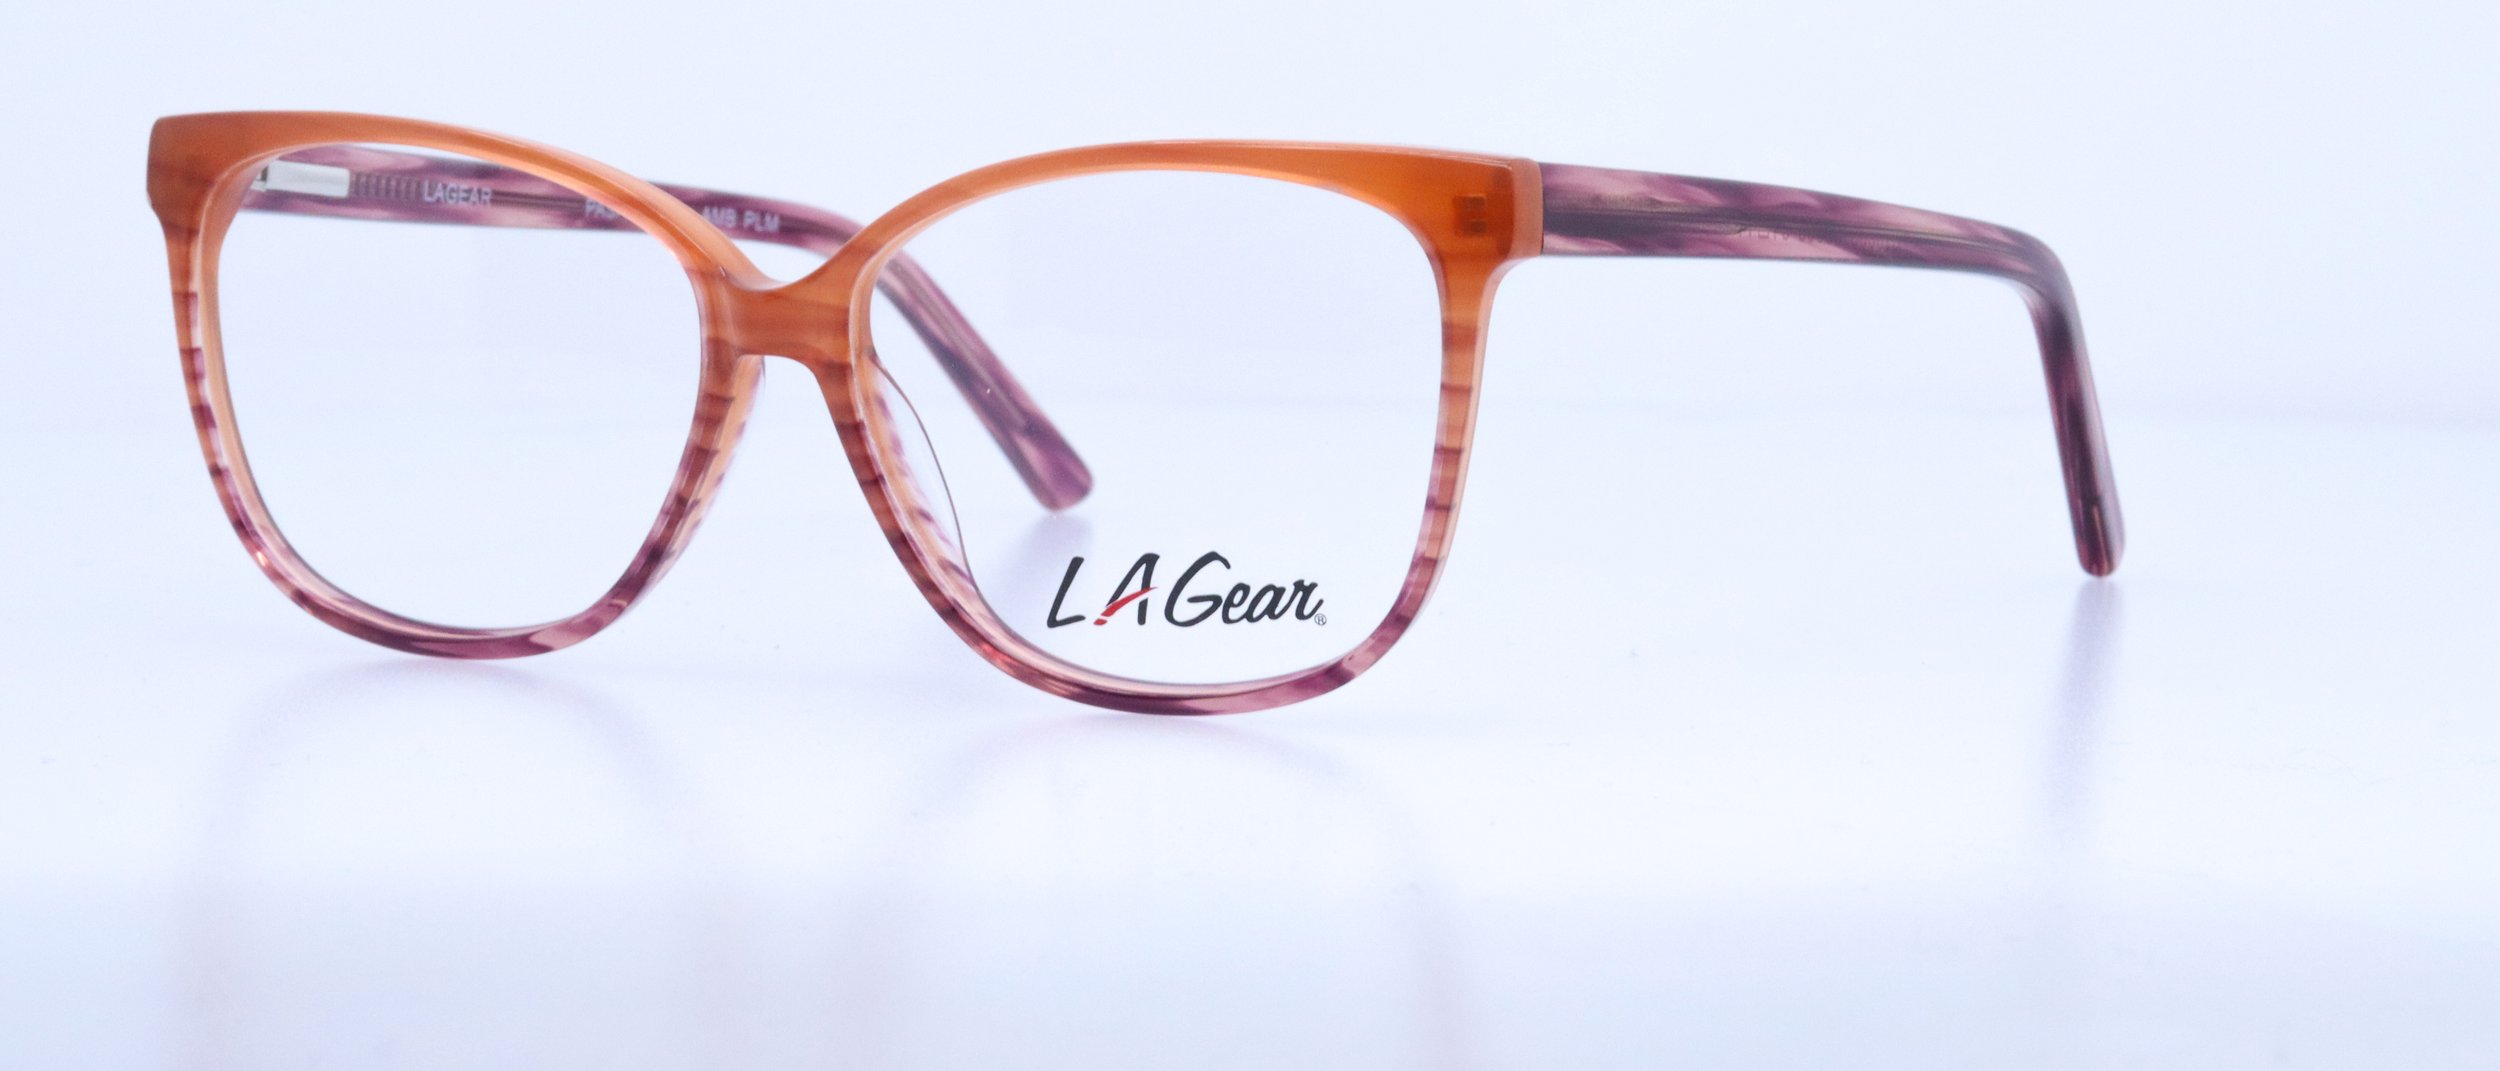  Pasadena: 54-14-140, Available in Amber/Plum or Tortoise 